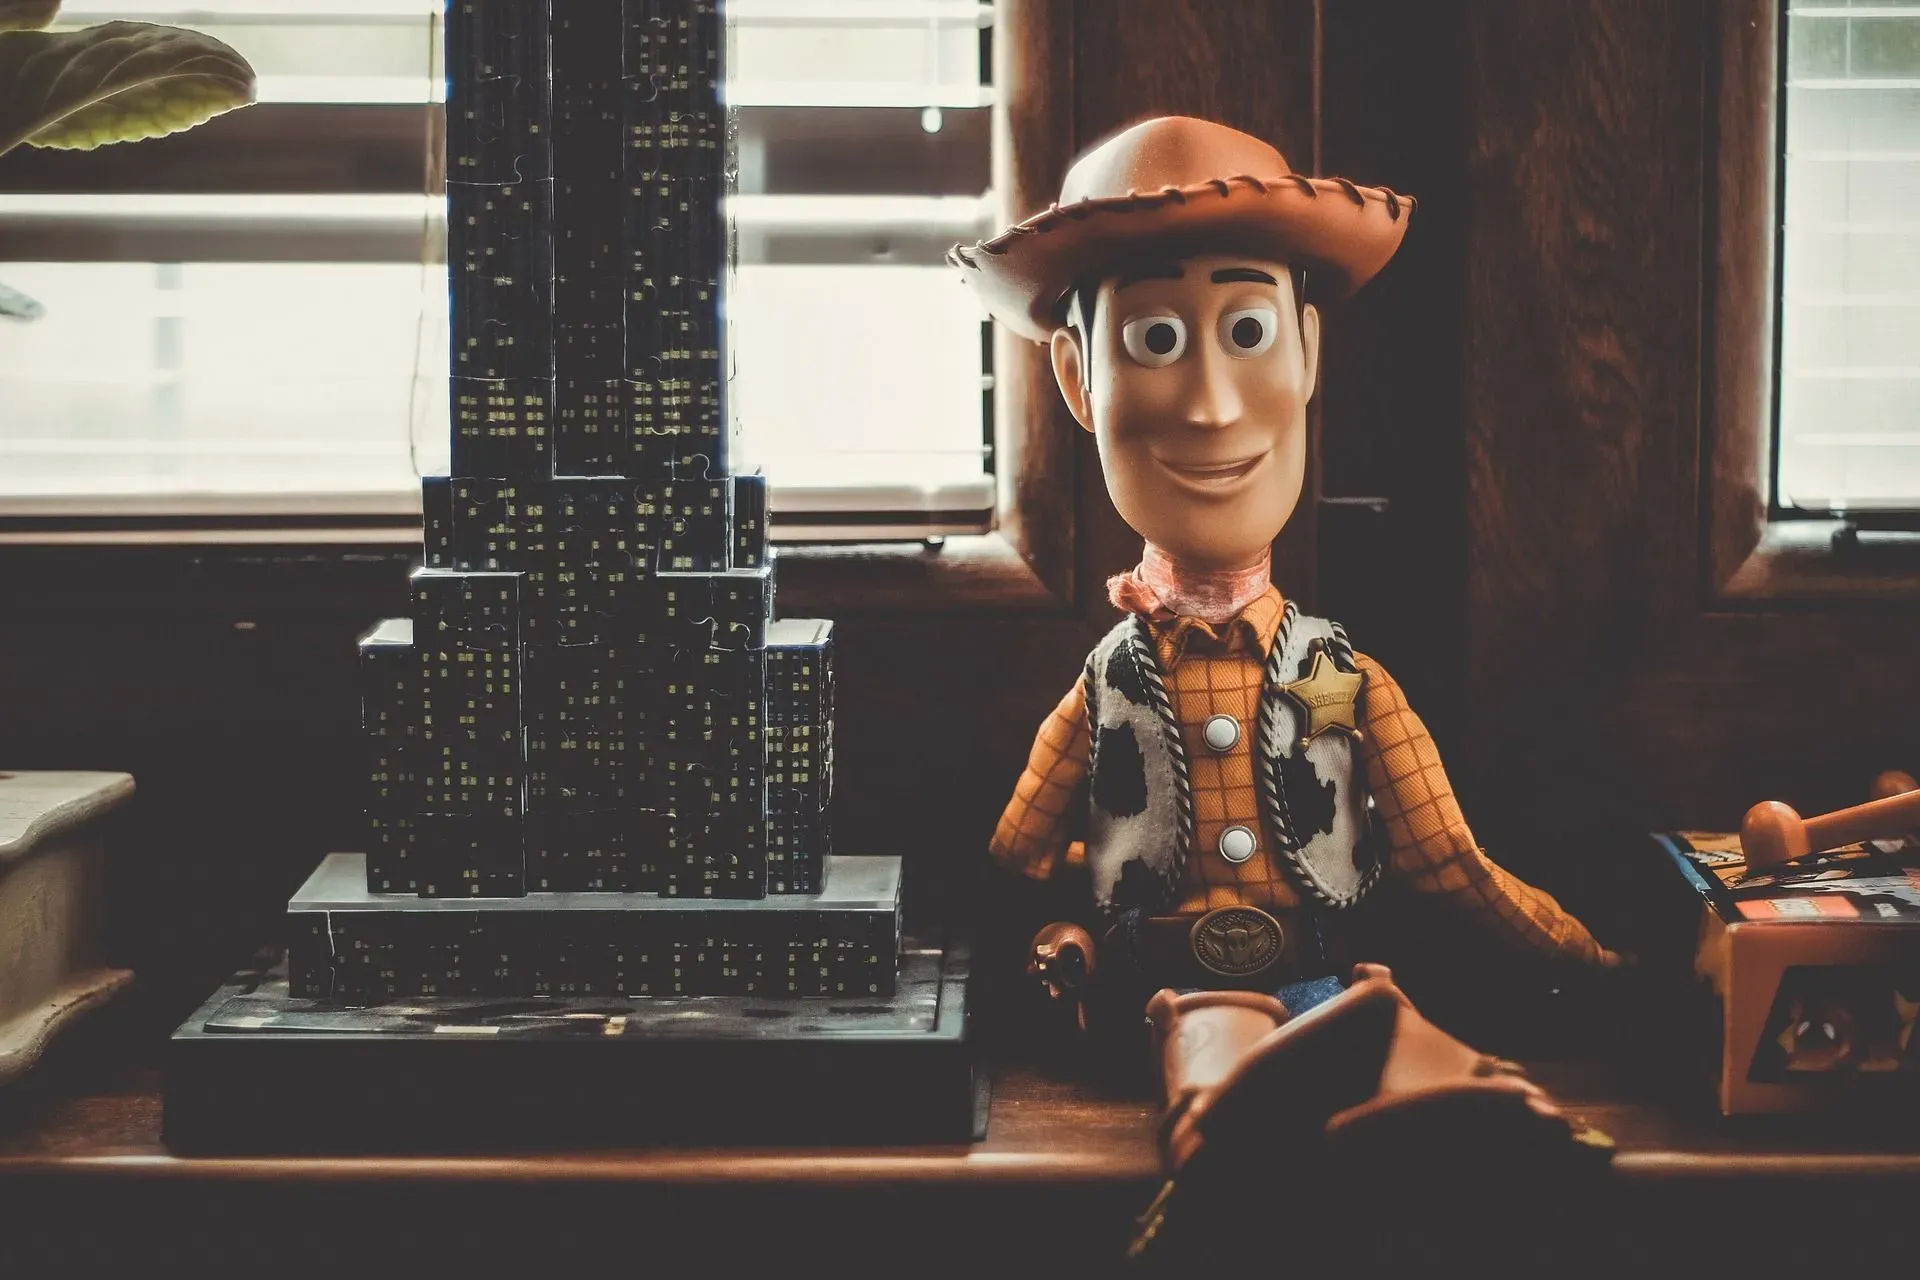 The original 'Toy Story' is one of the most popular animated movies from Disney Pixar.